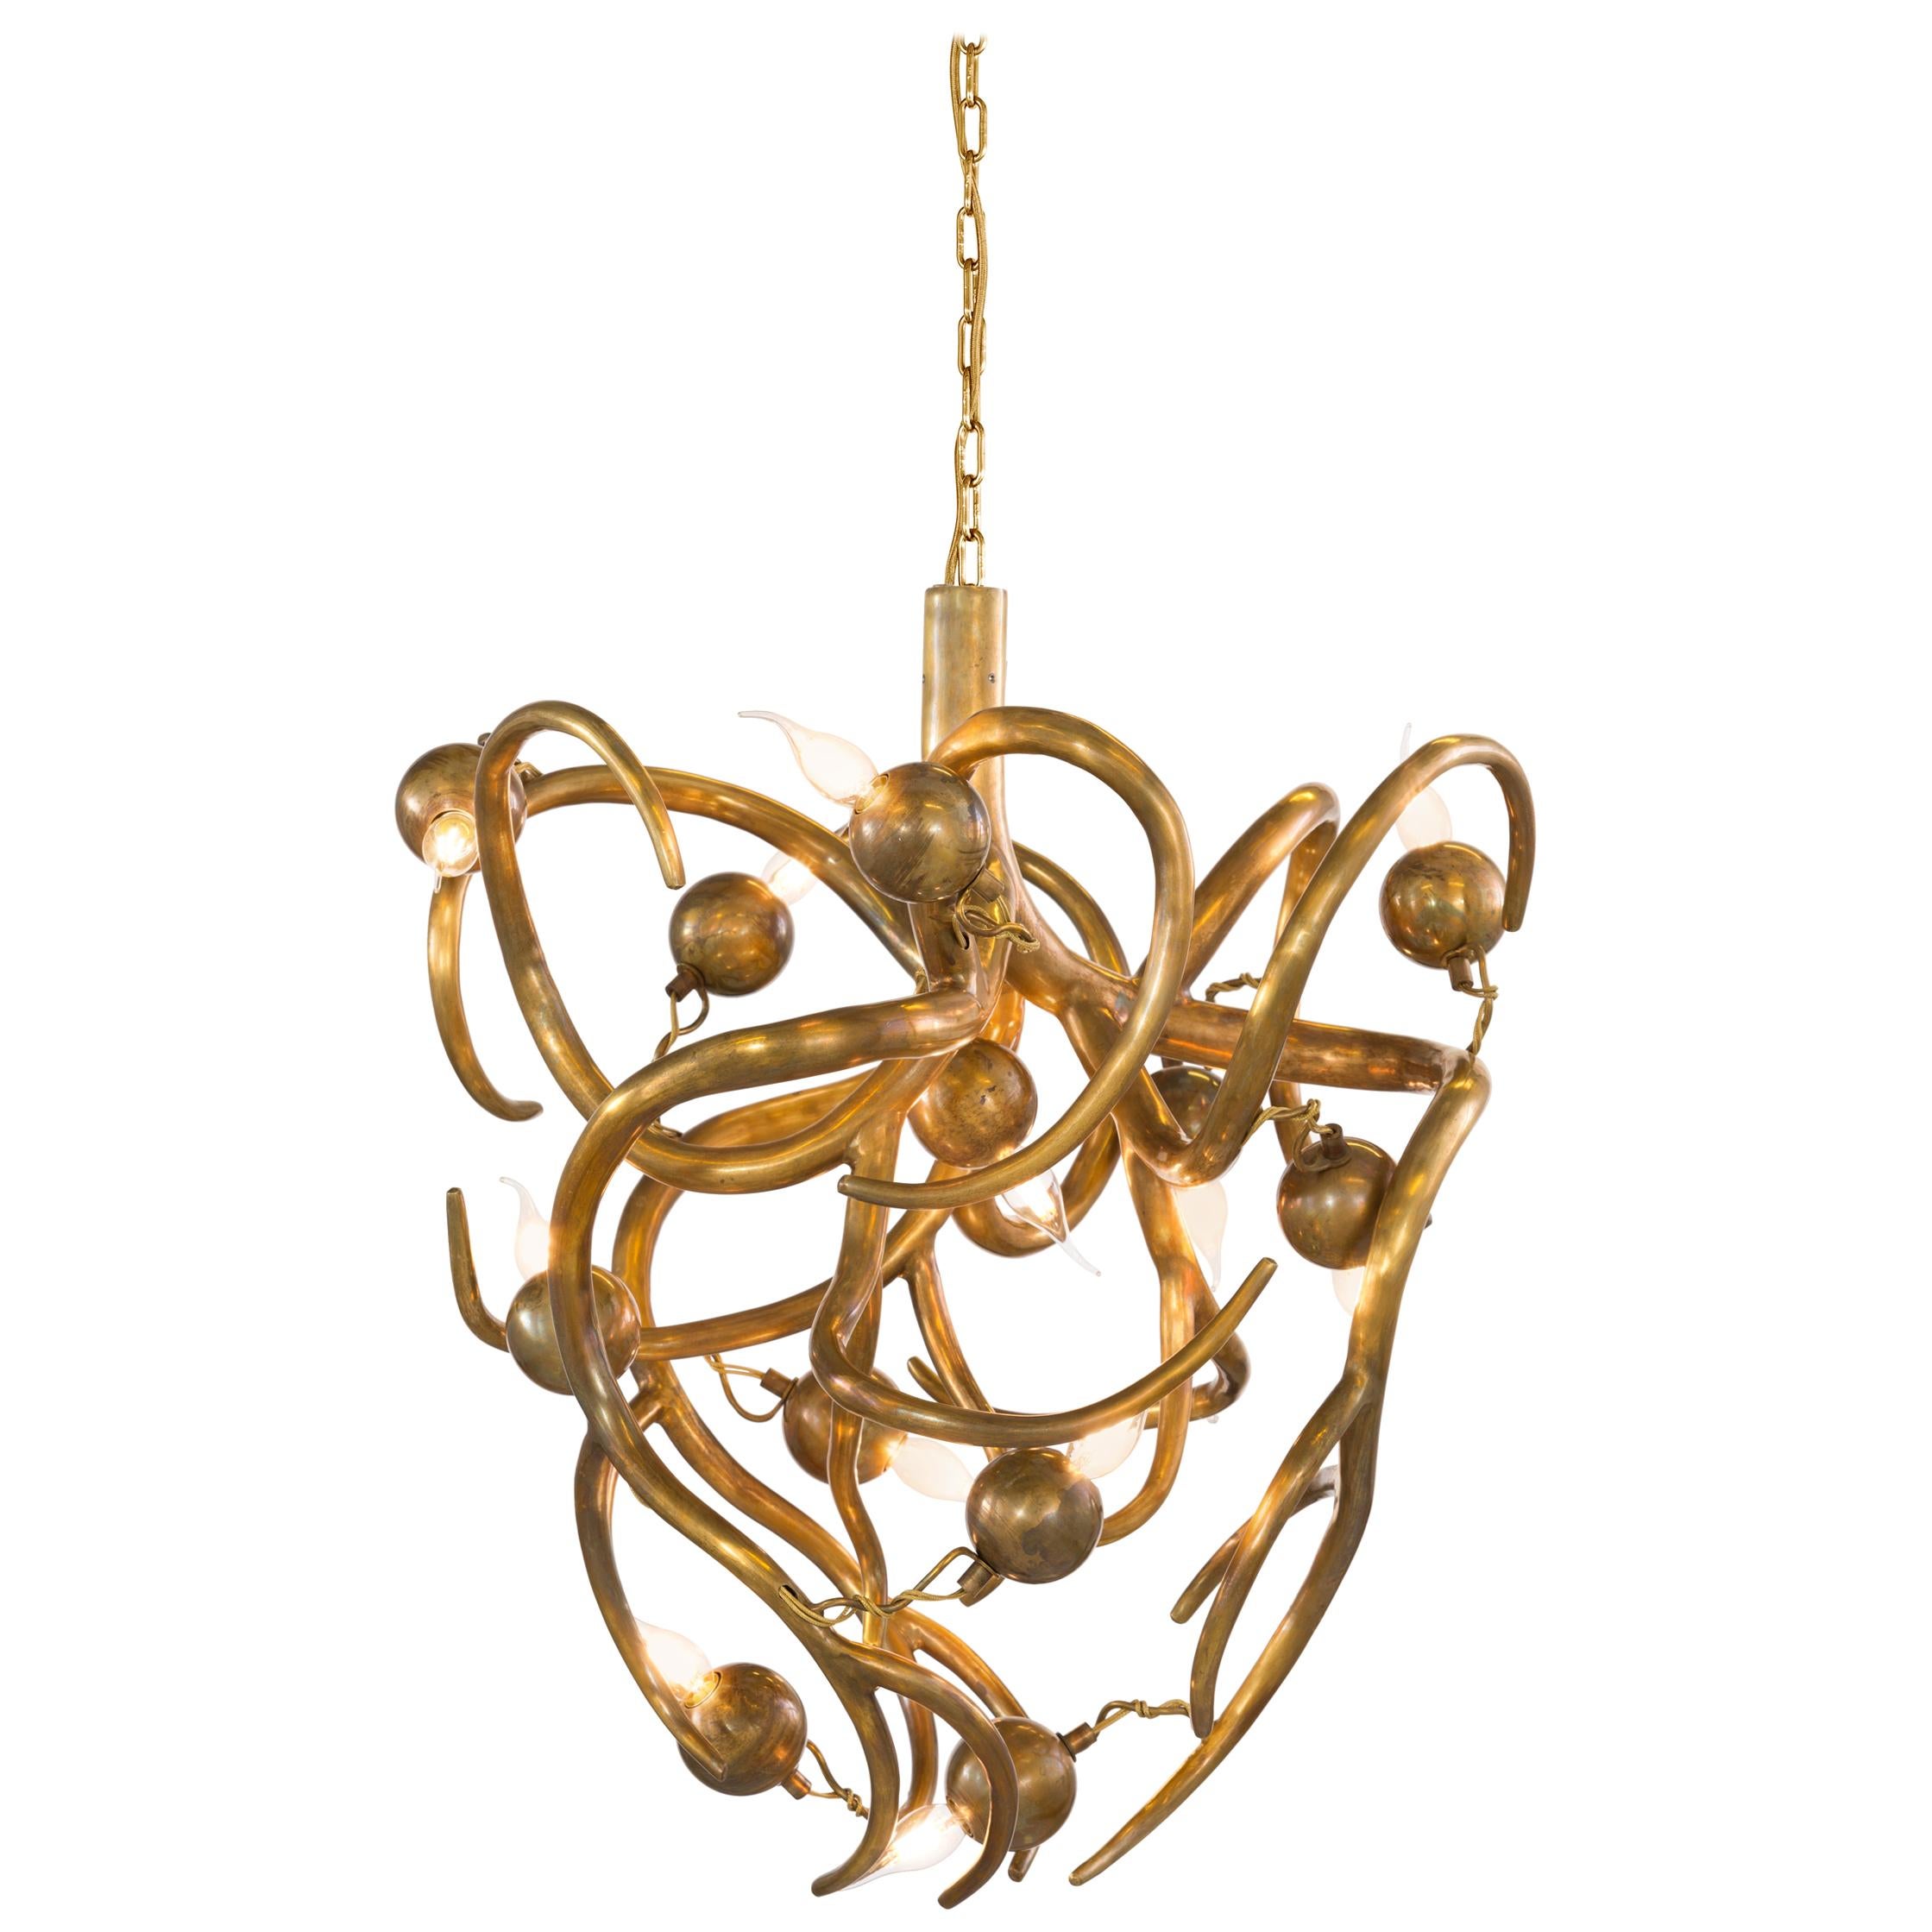 Modern Chandelier in a Brass Brunished Finish, Eve Collection, by Brand Van